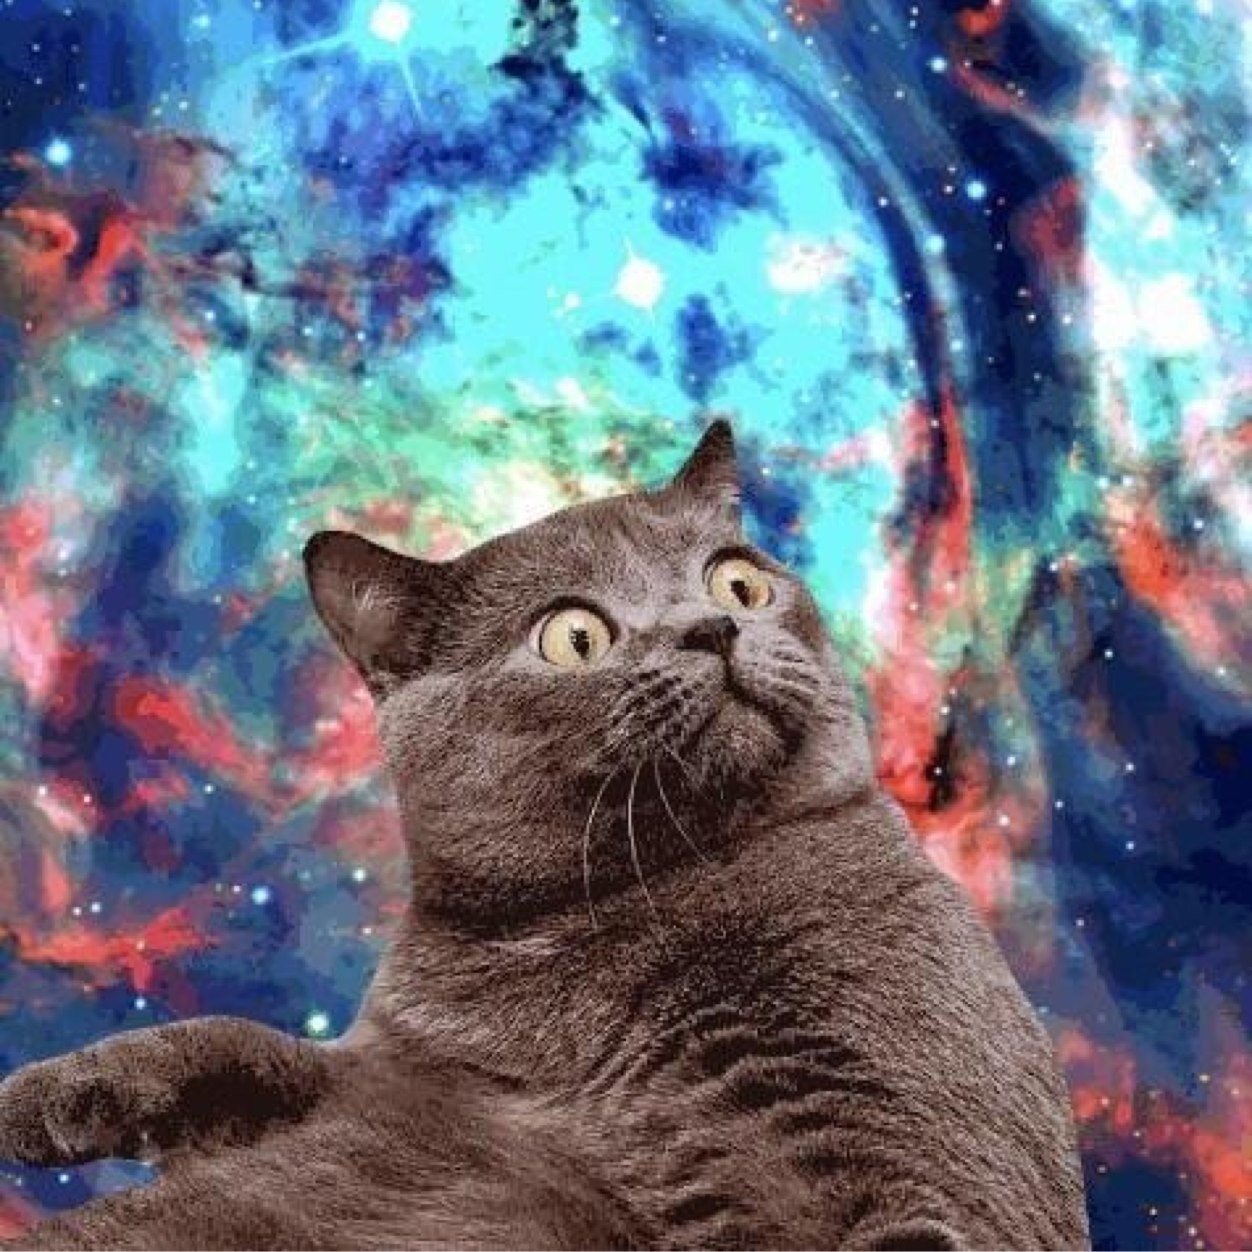 Space Cats ItsSpaceCats Twitter 1252x1252